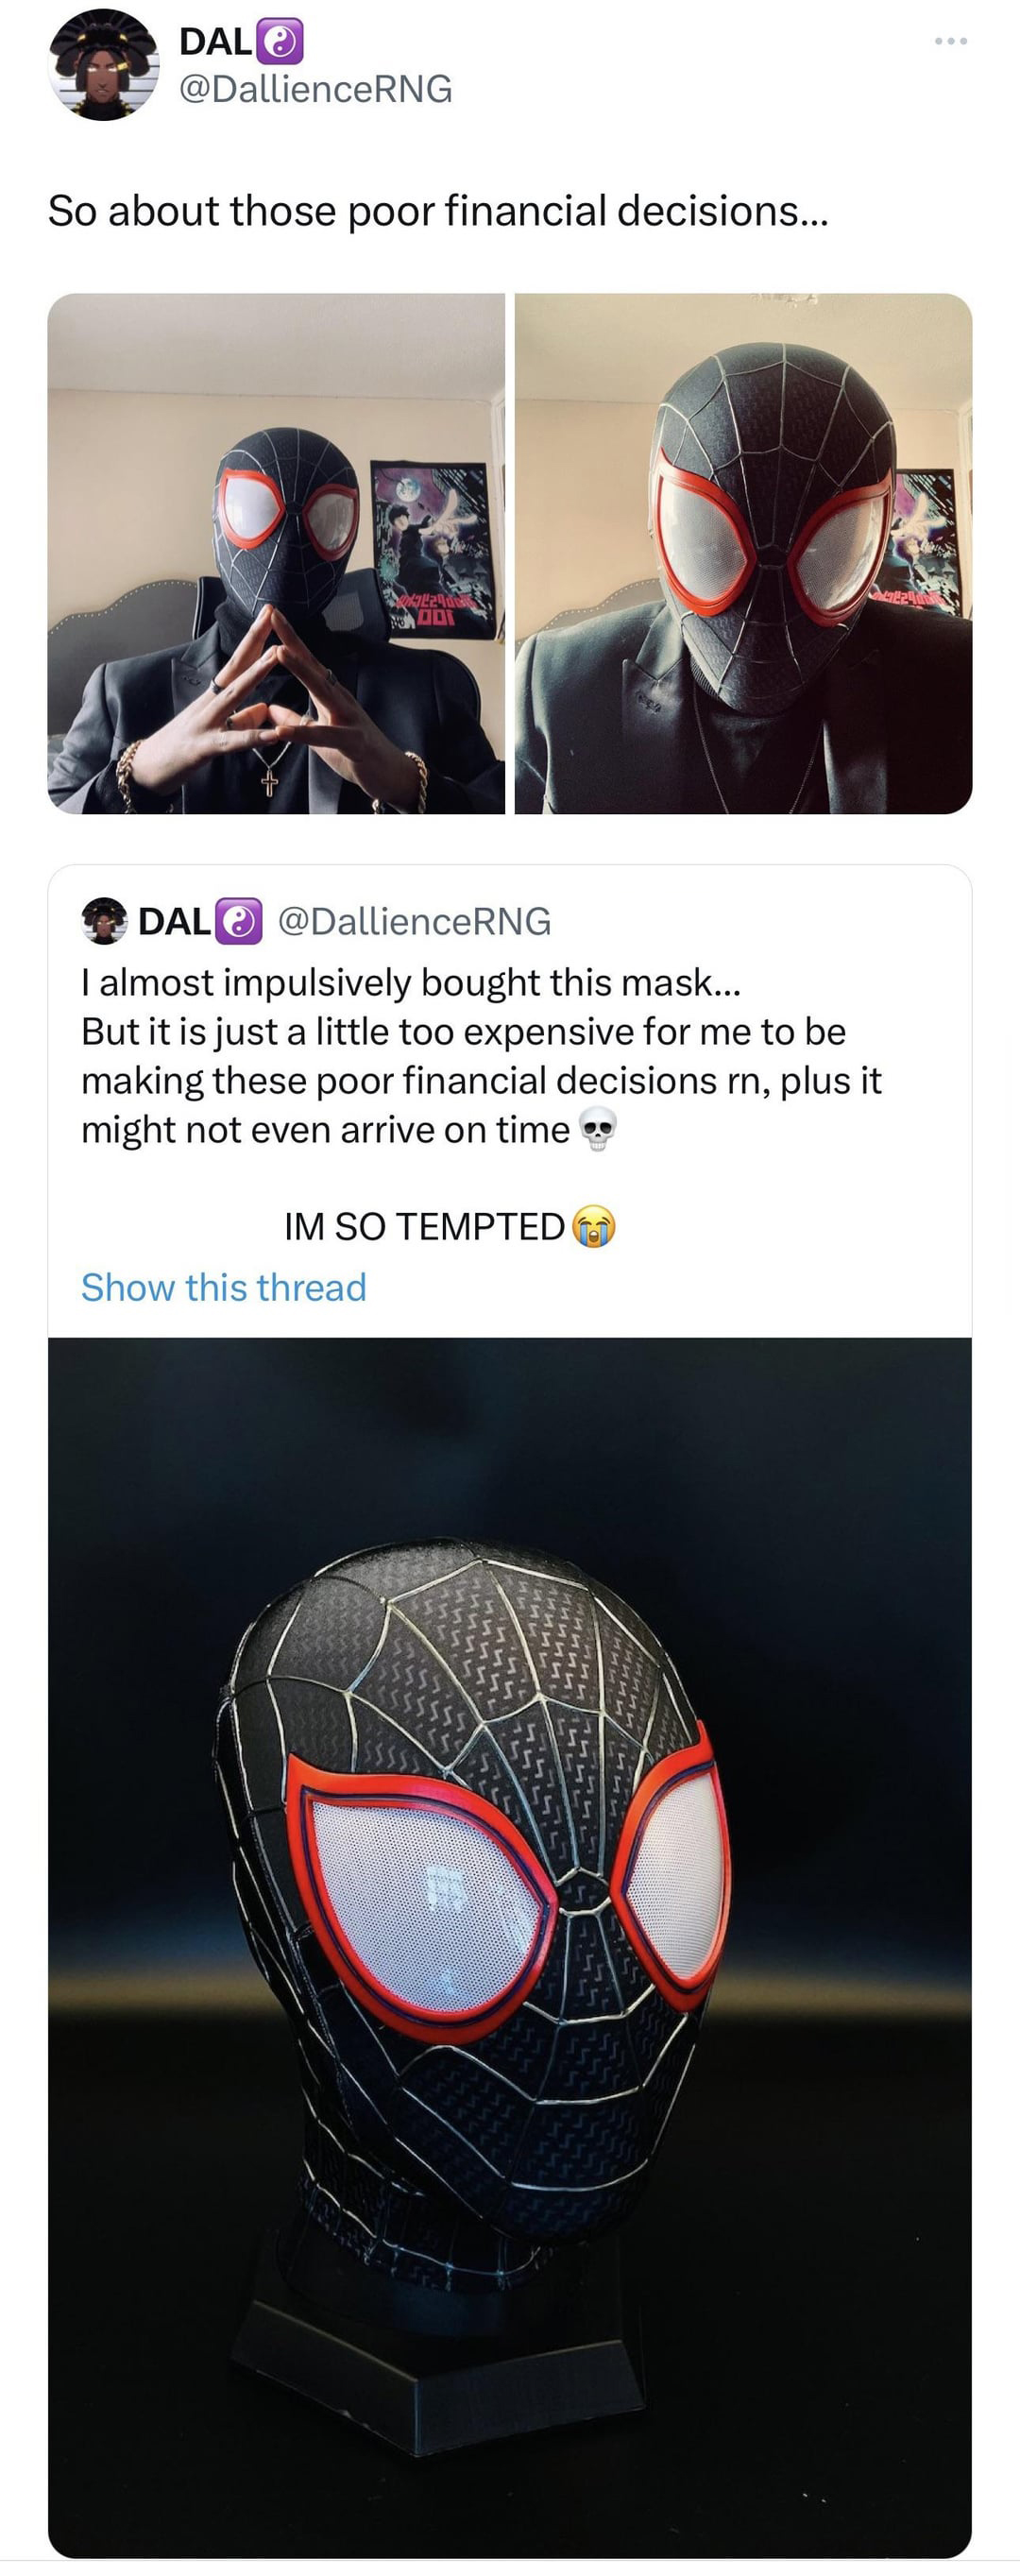 funny tweets and twitter memes - goggles - Dal Rng So about those poor financial decisions... Dal DallienceRNG I almost impulsively bought this mask.... But it is just a little too expensive for me to be making these poor financial decisions m, plus it mi